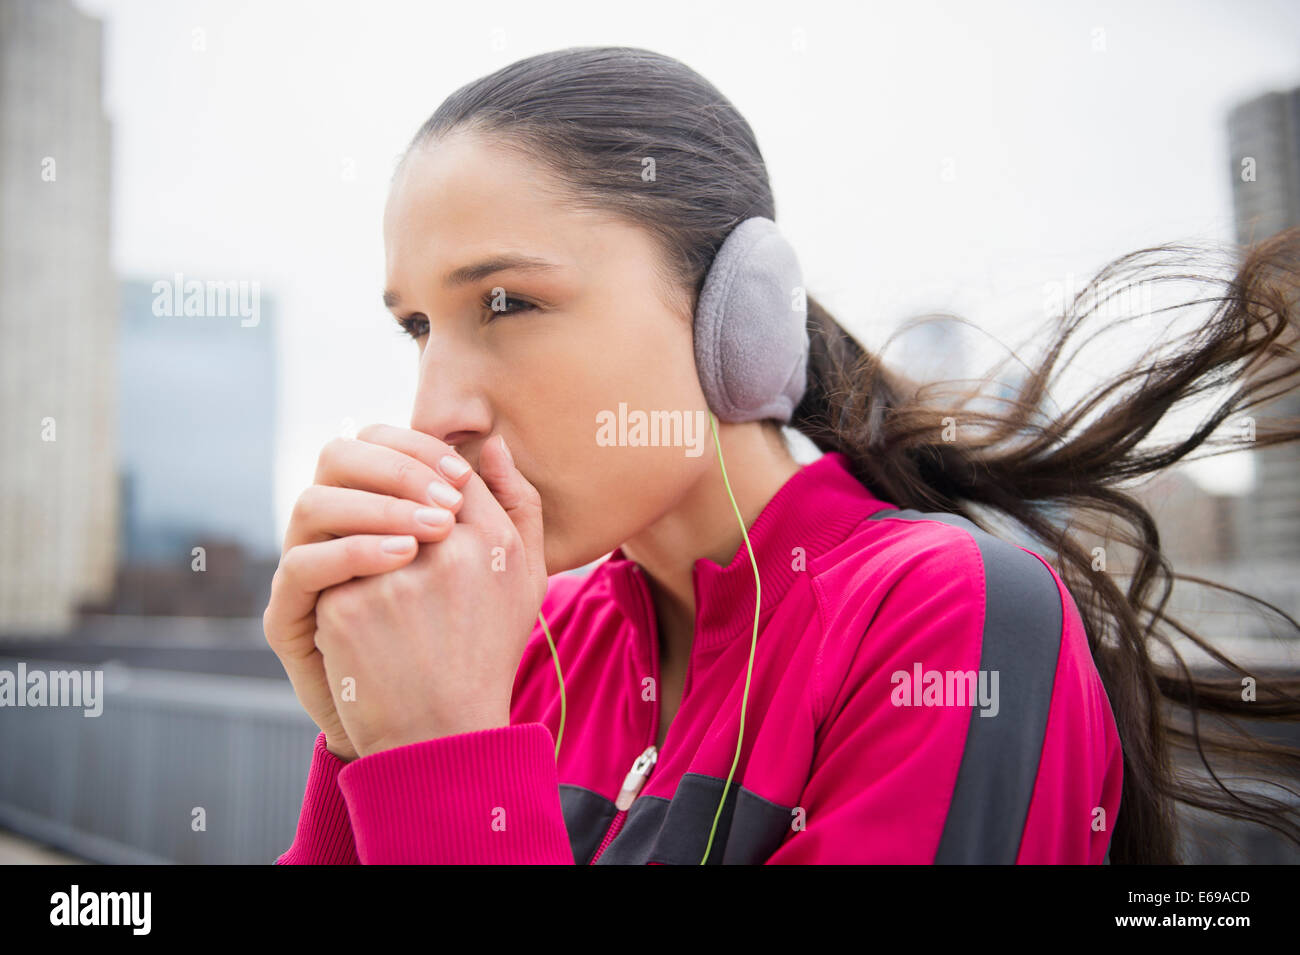 Caucasian woman warming hands in city Stock Photo